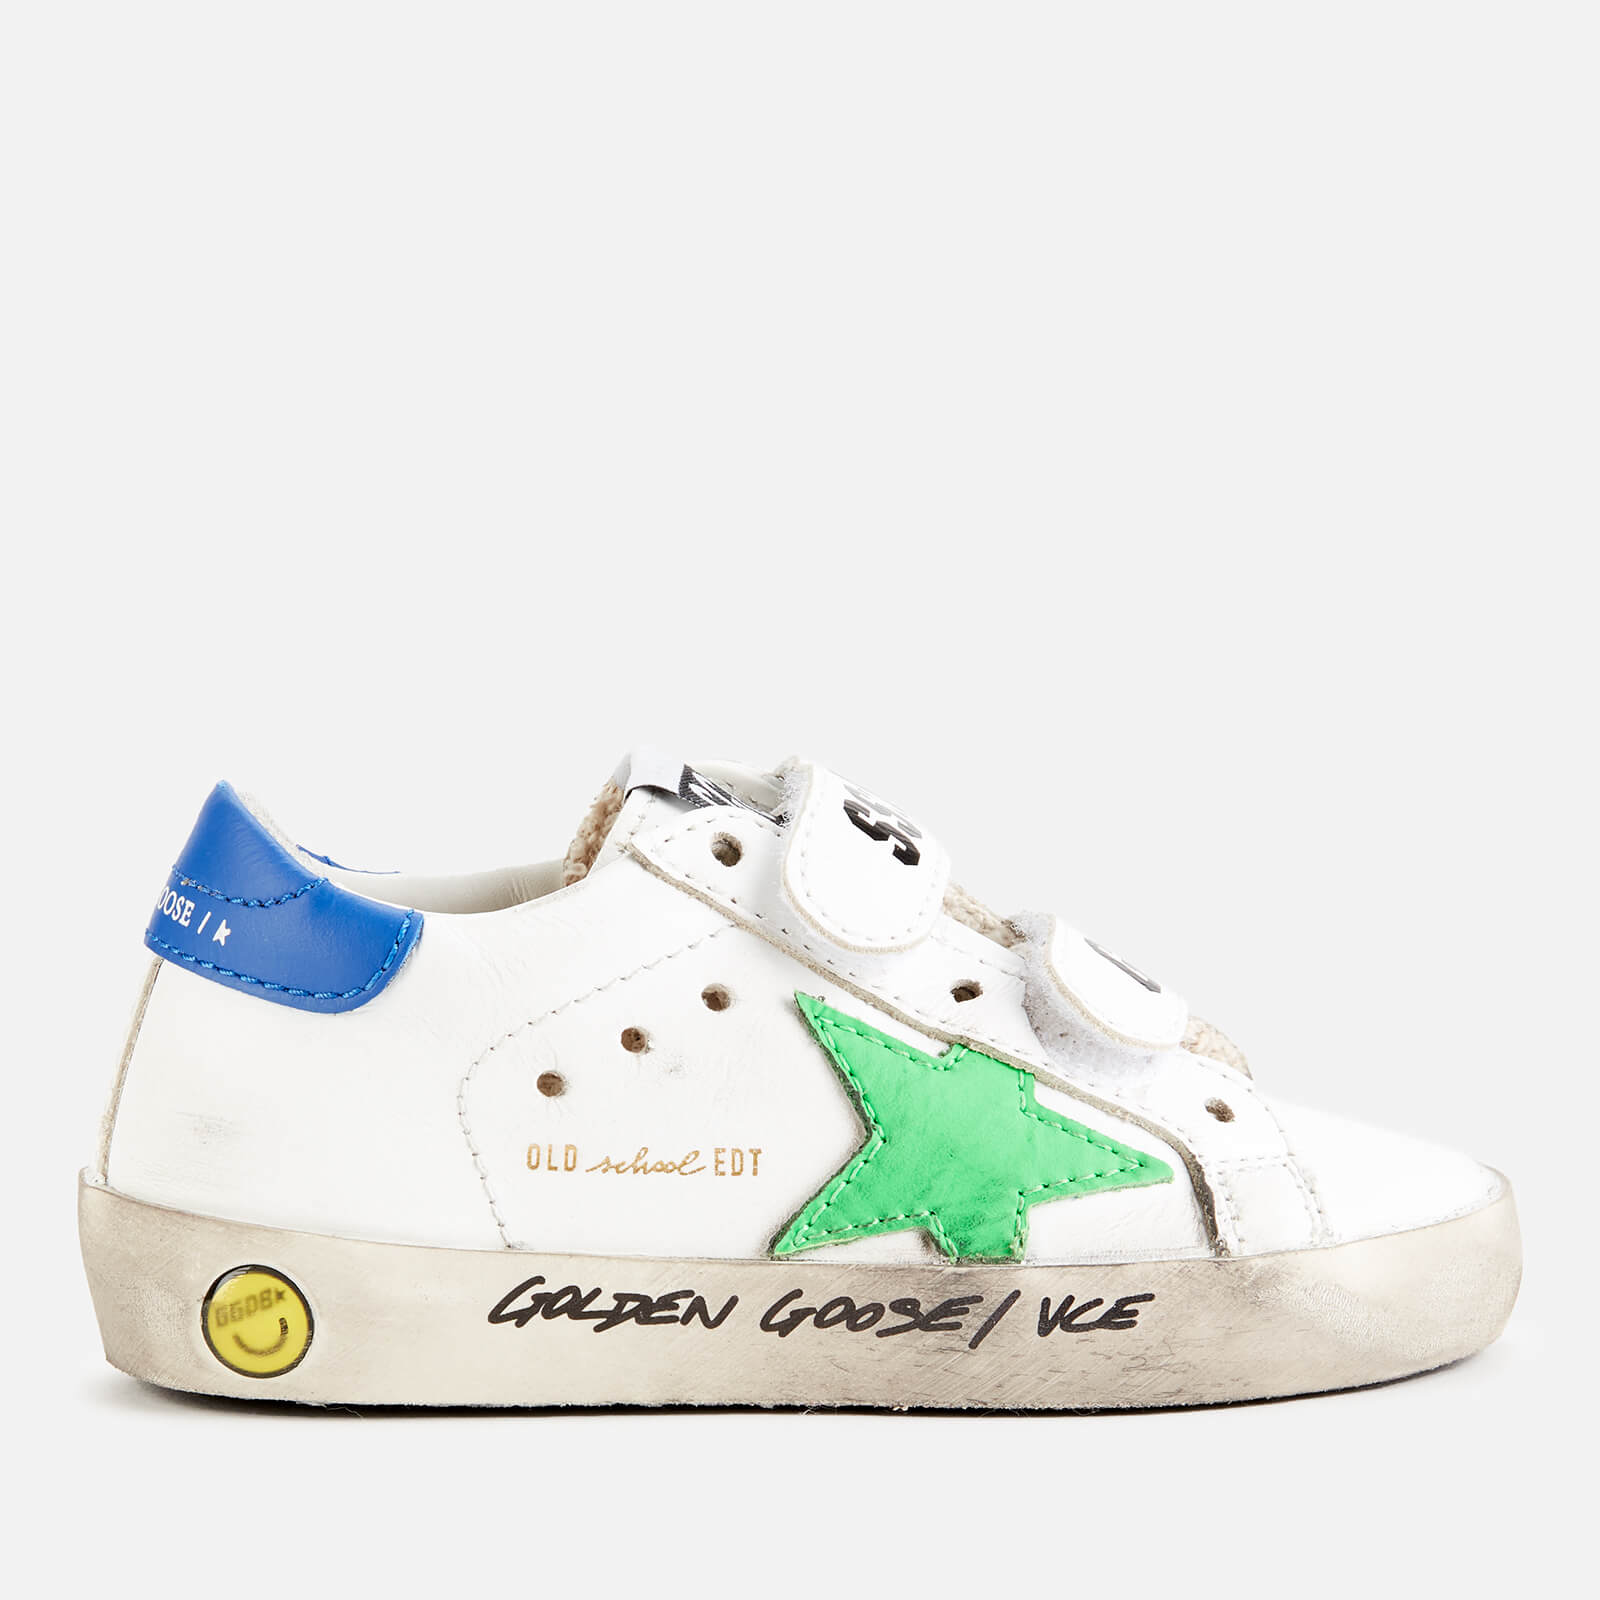 Golden Goose Toddlers' Leather Upper Stripes Star And Heel Signature Foxing Trainers - White/Fluo Green/Blue - UK 4 Infant